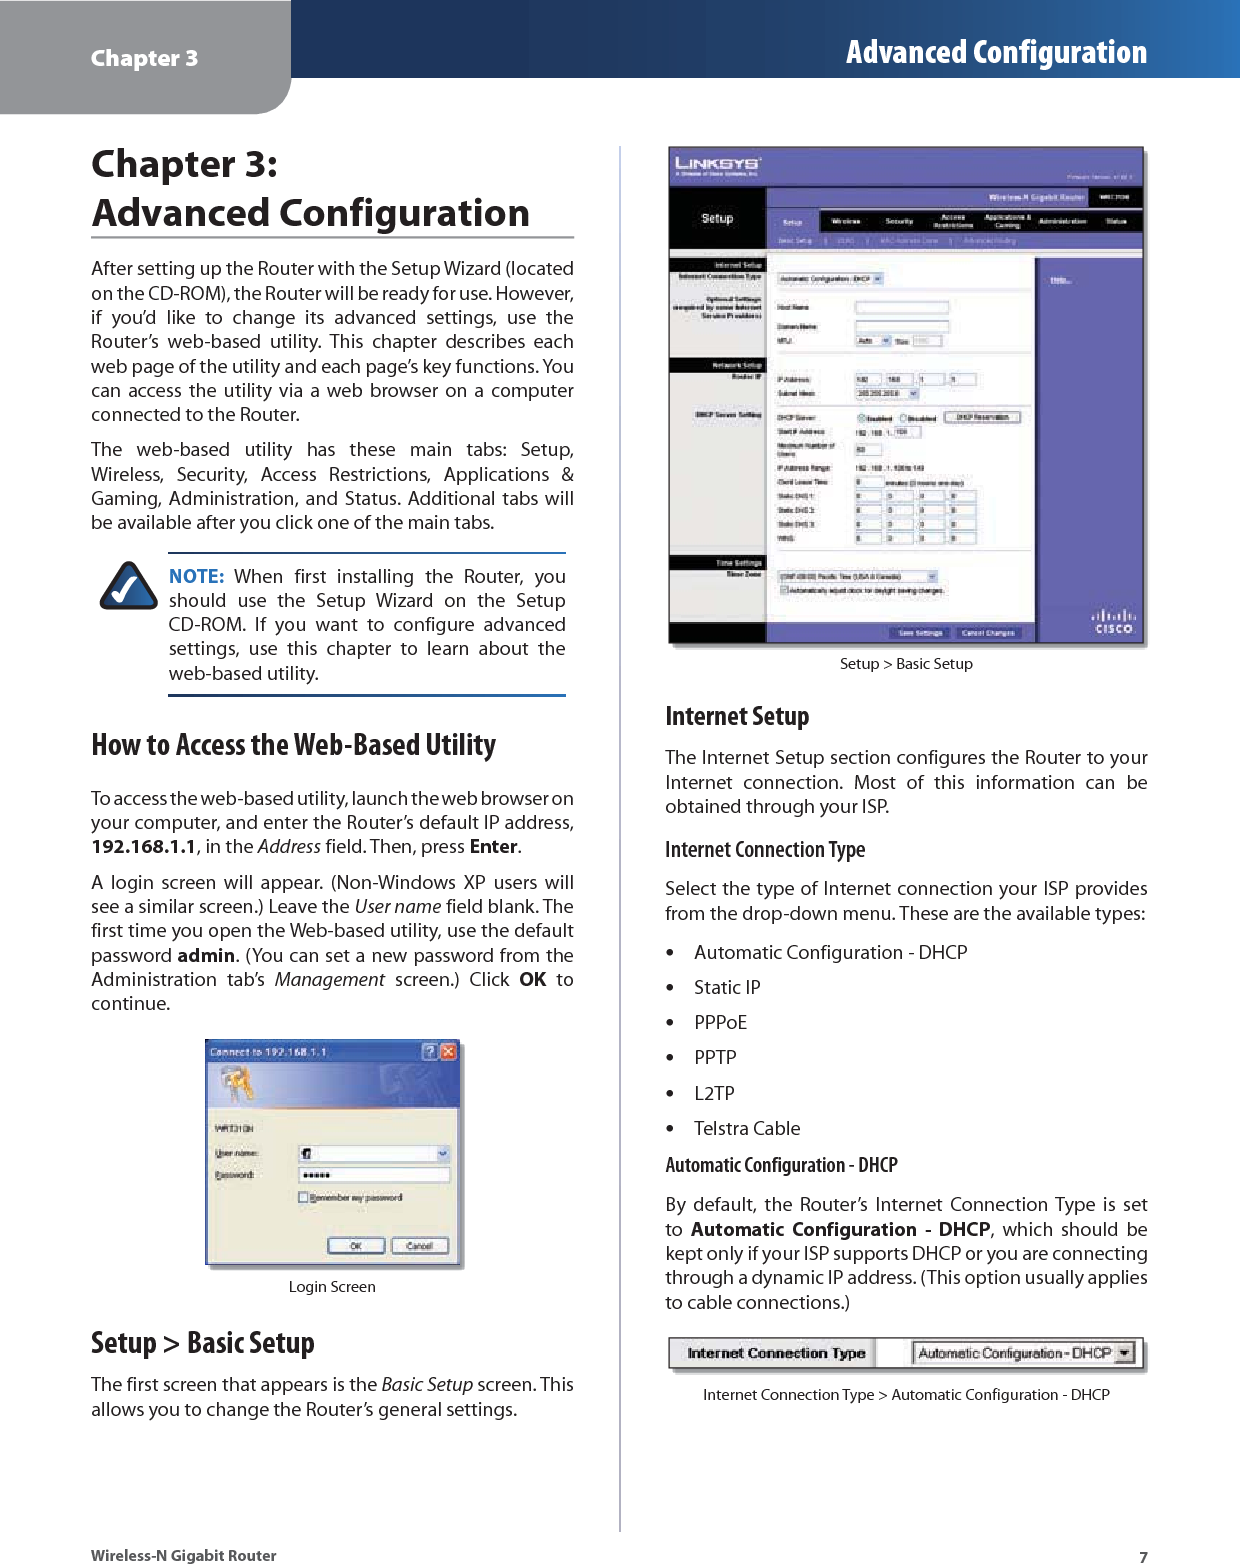 Chapter 3 Advanced Configuration7Wireless-N Gigabit RouterChapter 3: Advanced ConfigurationAfter setting up the Router with the Setup Wizard (located on the CD-ROM), the Router will be ready for use. However, if you’d like to change its advanced settings, use the Router’s web-based utility. This chapter describes each web page of the utility and each page’s key functions. You can access the utility via a web browser on a computer connected to the Router.The web-based utility has these main tabs: Setup, Wireless, Security, Access Restrictions, Applications &amp; Gaming, Administration, and Status. Additional tabs will be available after you click one of the main tabs.NOTE: When first installing the Router, you should use the Setup Wizard on the Setup CD-ROM. If you want to configure advanced settings, use this chapter to learn about the web-based utility.How to Access the Web-Based UtilityTo access the web-based utility, launch the web browser on your computer, and enter the Router’s default IP address, 192.168.1.1, in the Address field. Then, press Enter.A login screen will appear. (Non-Windows XP users will see a similar screen.) Leave the User name field blank. The first time you open the Web-based utility, use the default password admin. (You can set a new password from the Administration tab’s Management screen.) Click OK to continue.Login ScreenSetup &gt; Basic SetupThe first screen that appears is the Basic Setup screen. This allows you to change the Router’s general settings. Setup &gt; Basic SetupInternet SetupThe Internet Setup section configures the Router to your Internet connection. Most of this information can be obtained through your ISP.Internet Connection TypeSelect the type of Internet connection your ISP provides from the drop-down menu. These are the available types:Automatic Configuration - DHCPsStatic IPsPPPoEsPPTPsL2TPsTelstra CablesAutomatic Configuration - DHCPBy default, the Router’s Internet Connection Type is set to  Automatic Configuration - DHCP, which should be kept only if your ISP supports DHCP or you are connecting through a dynamic IP address. (This option usually applies to cable connections.)Internet Connection Type &gt; Automatic Configuration - DHCP